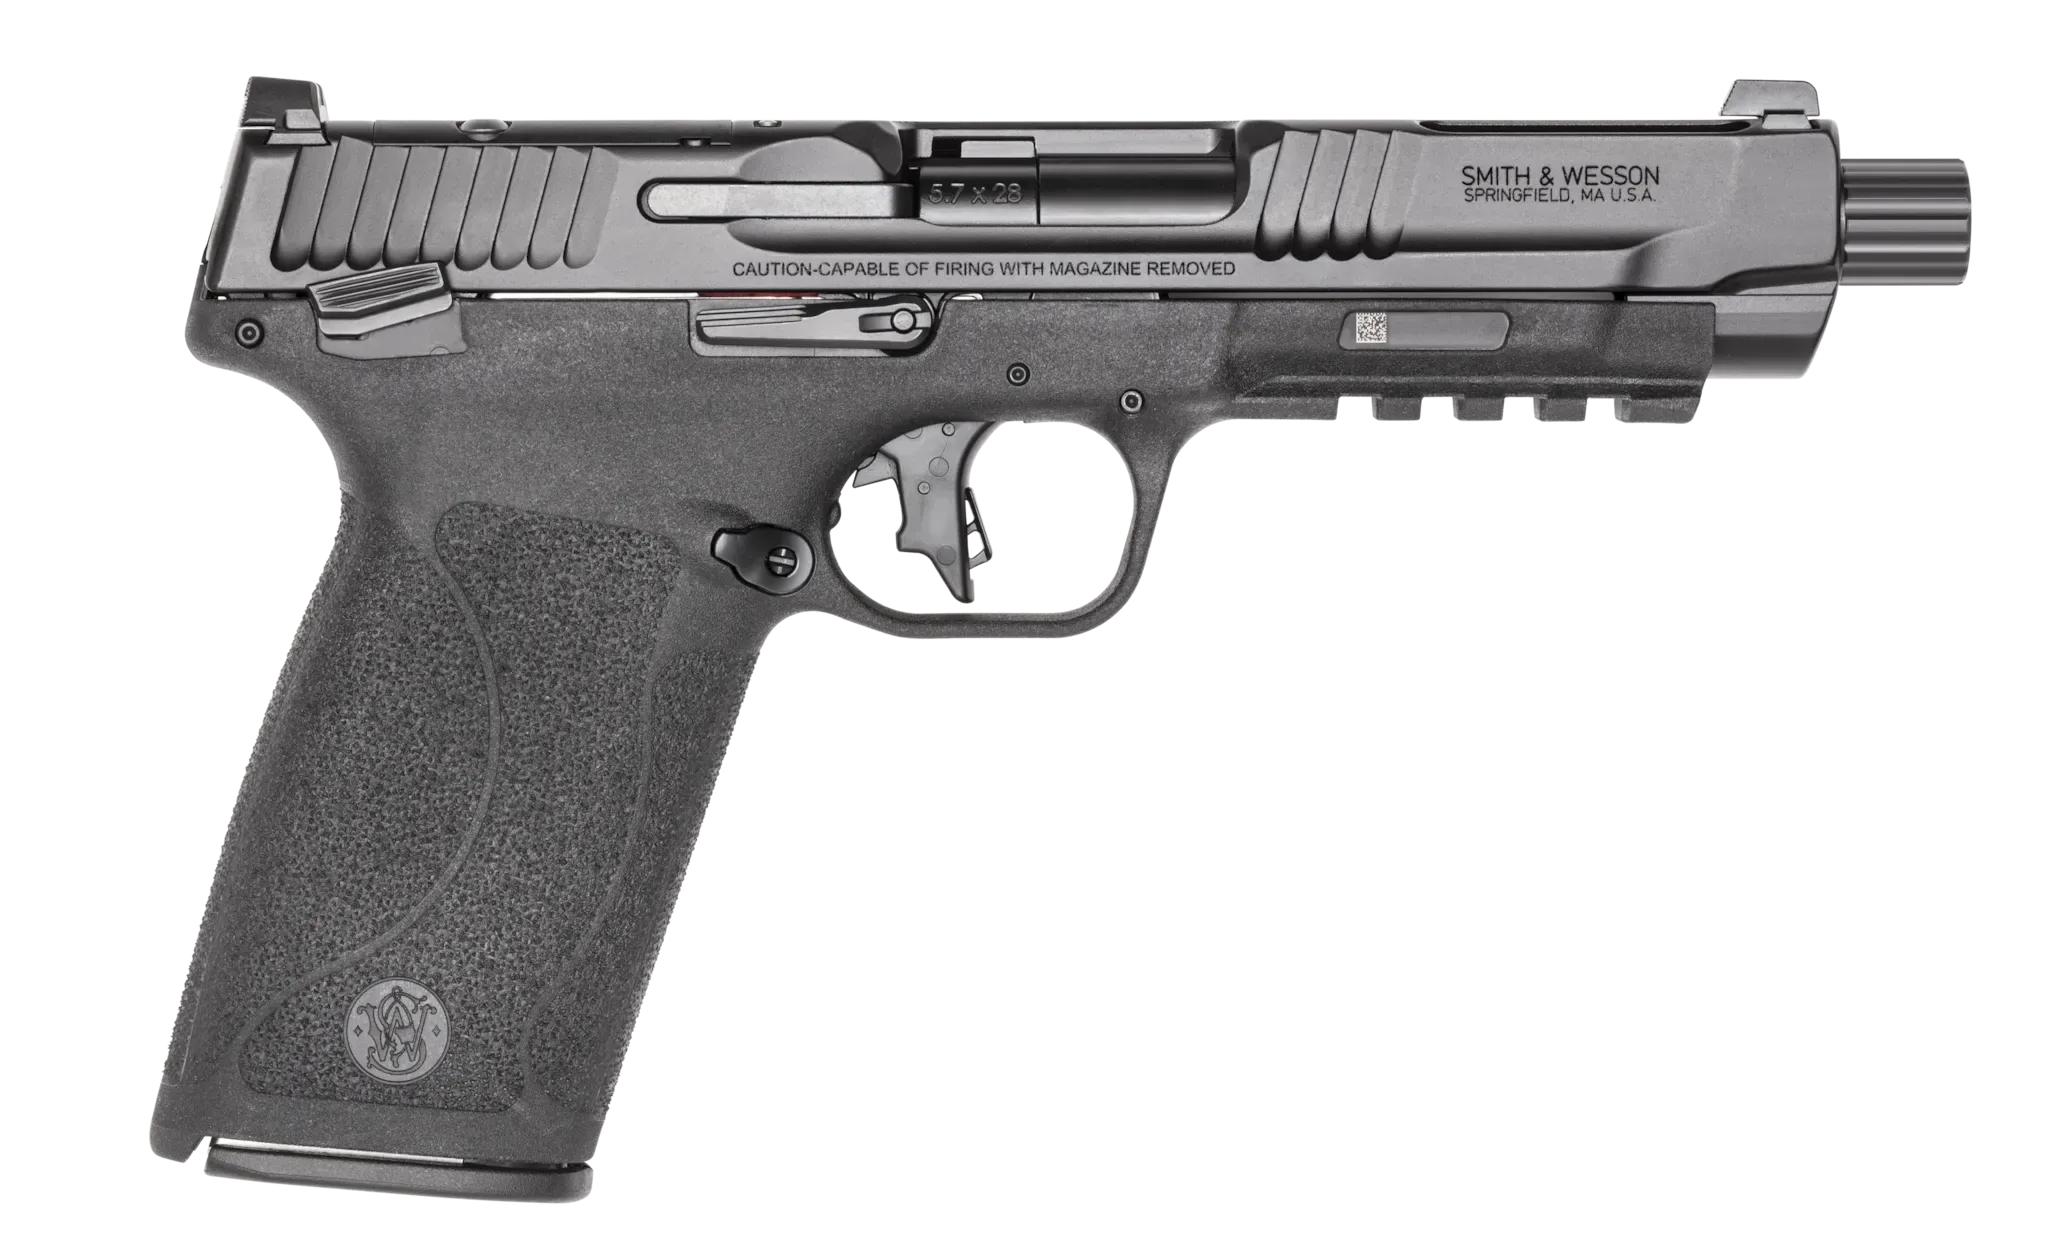 SMITH & WESSON M&P 5.7 MANUAL THUMB SAFETY